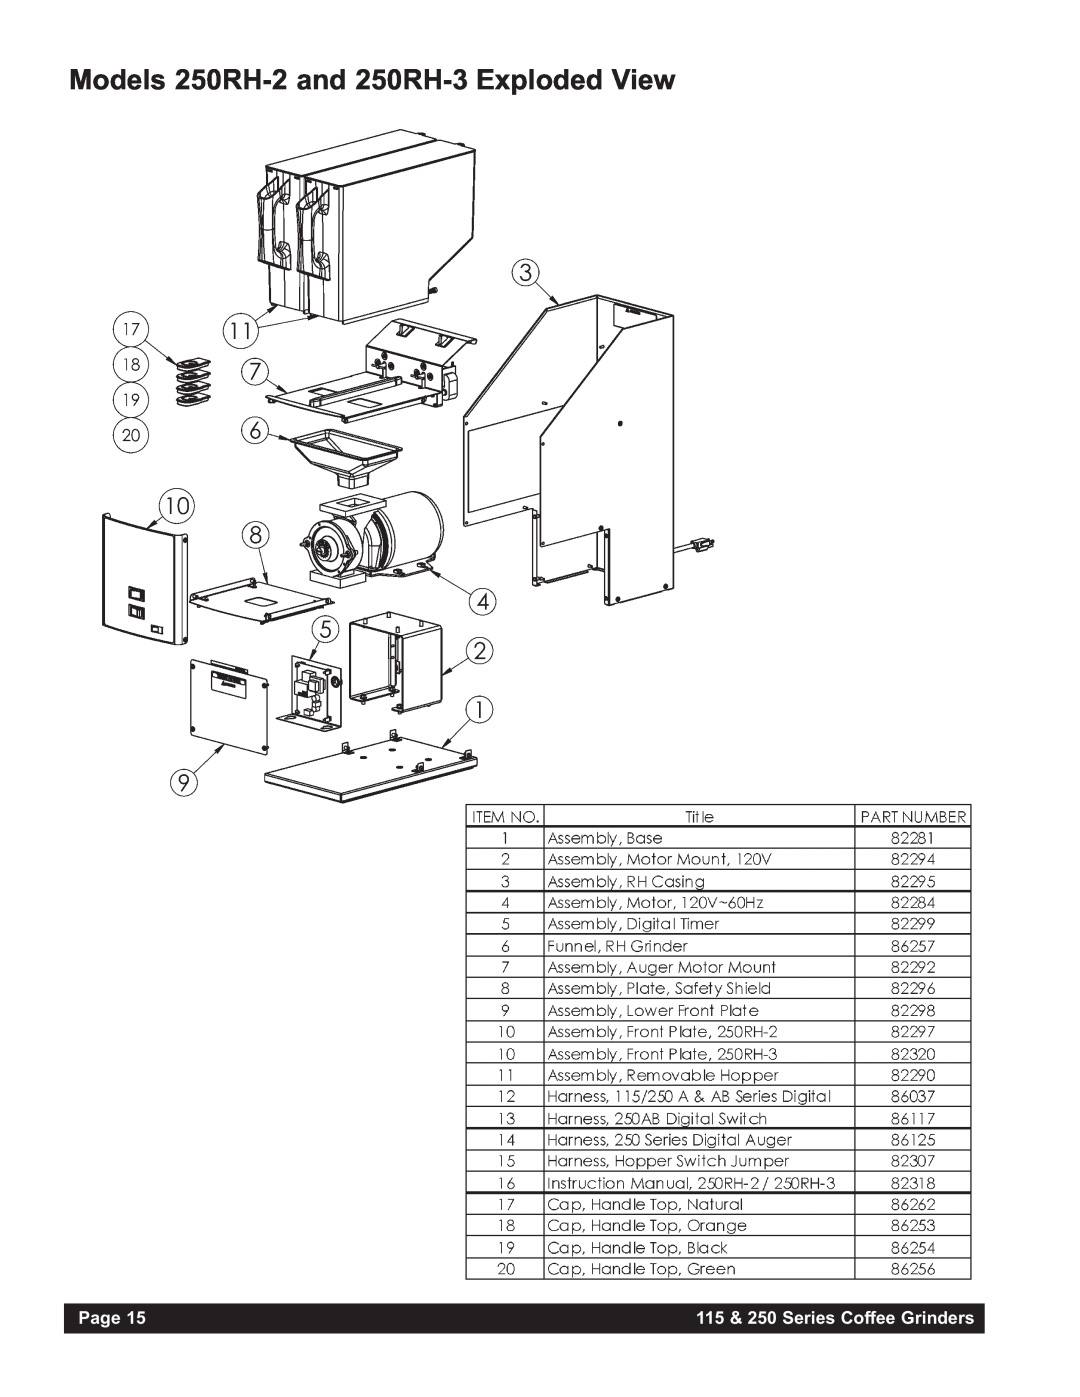 Grindmaster 250AB, 115AB Models 250RH-2 and 250RH-3 Exploded View, Page, 115 & 250 Series Coffee Grinders 